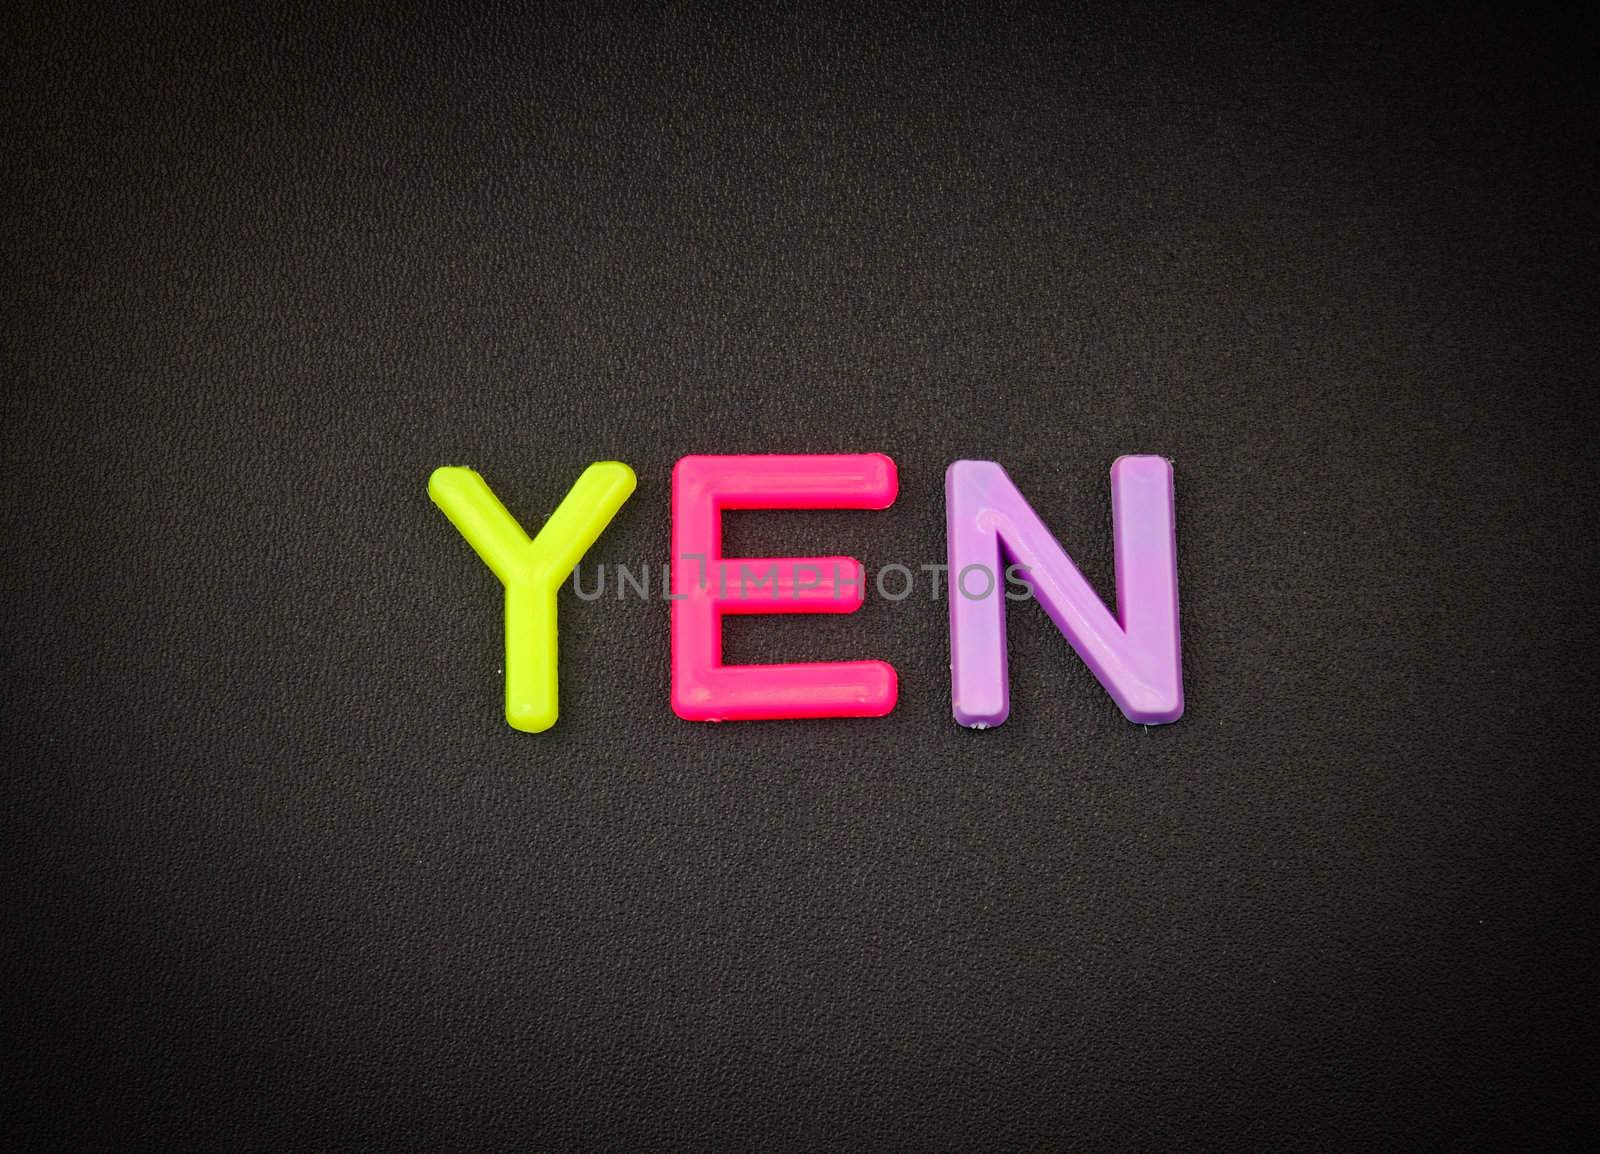 Yen in colorful toy letters on black background by nuchylee